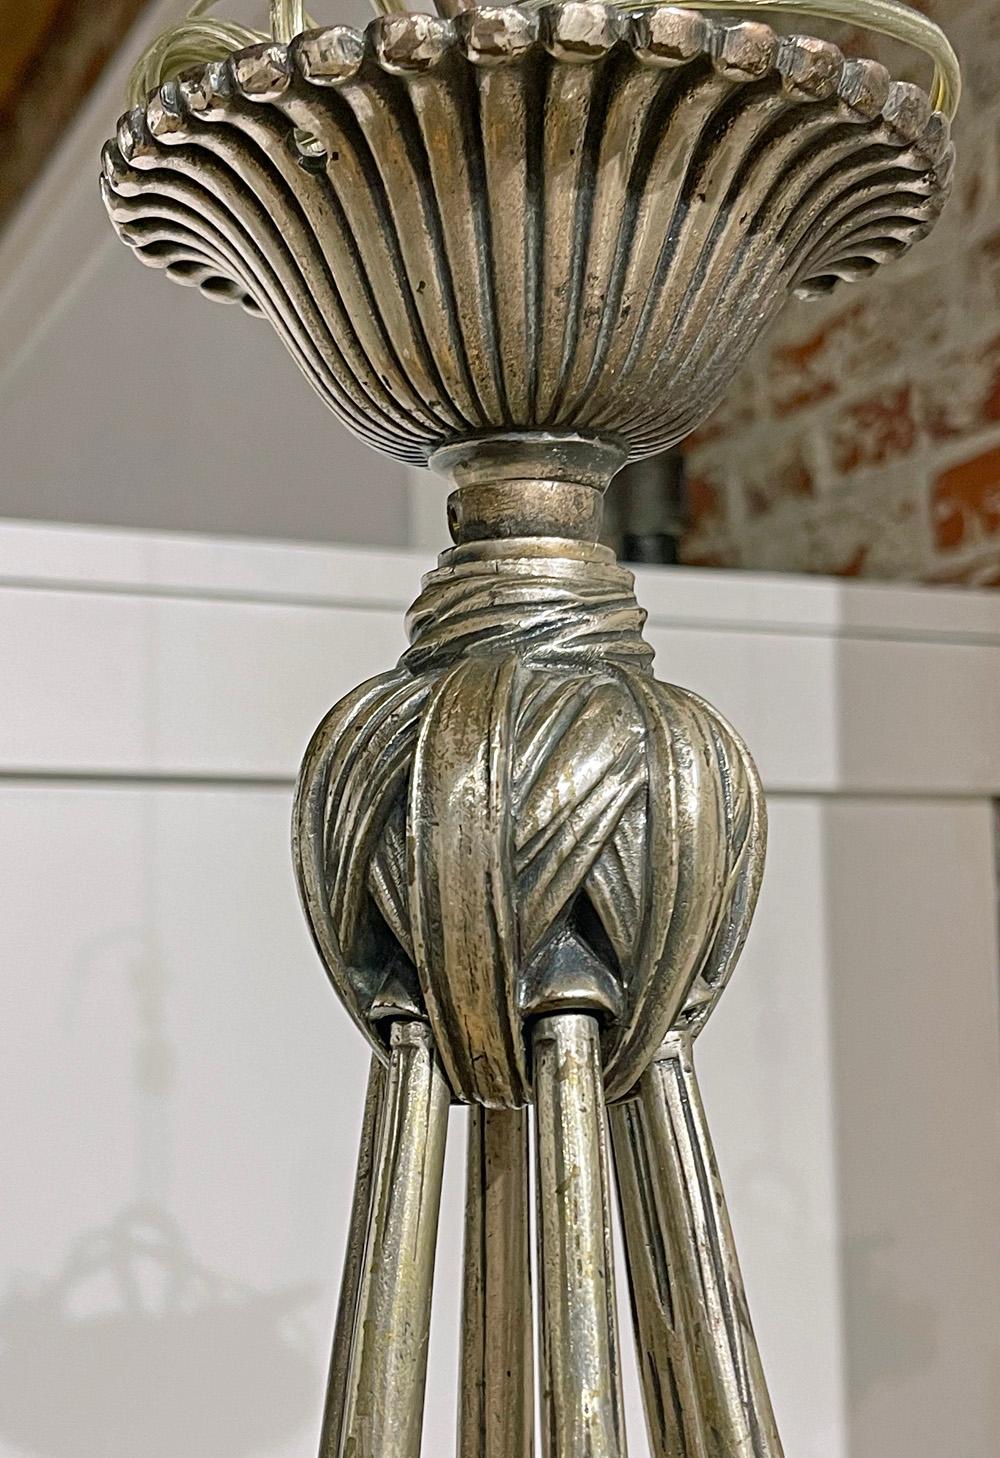 Early 20th Century Art Deco Six-Arm Chandelier, Silvered Bronze, Mid-1920s France For Sale